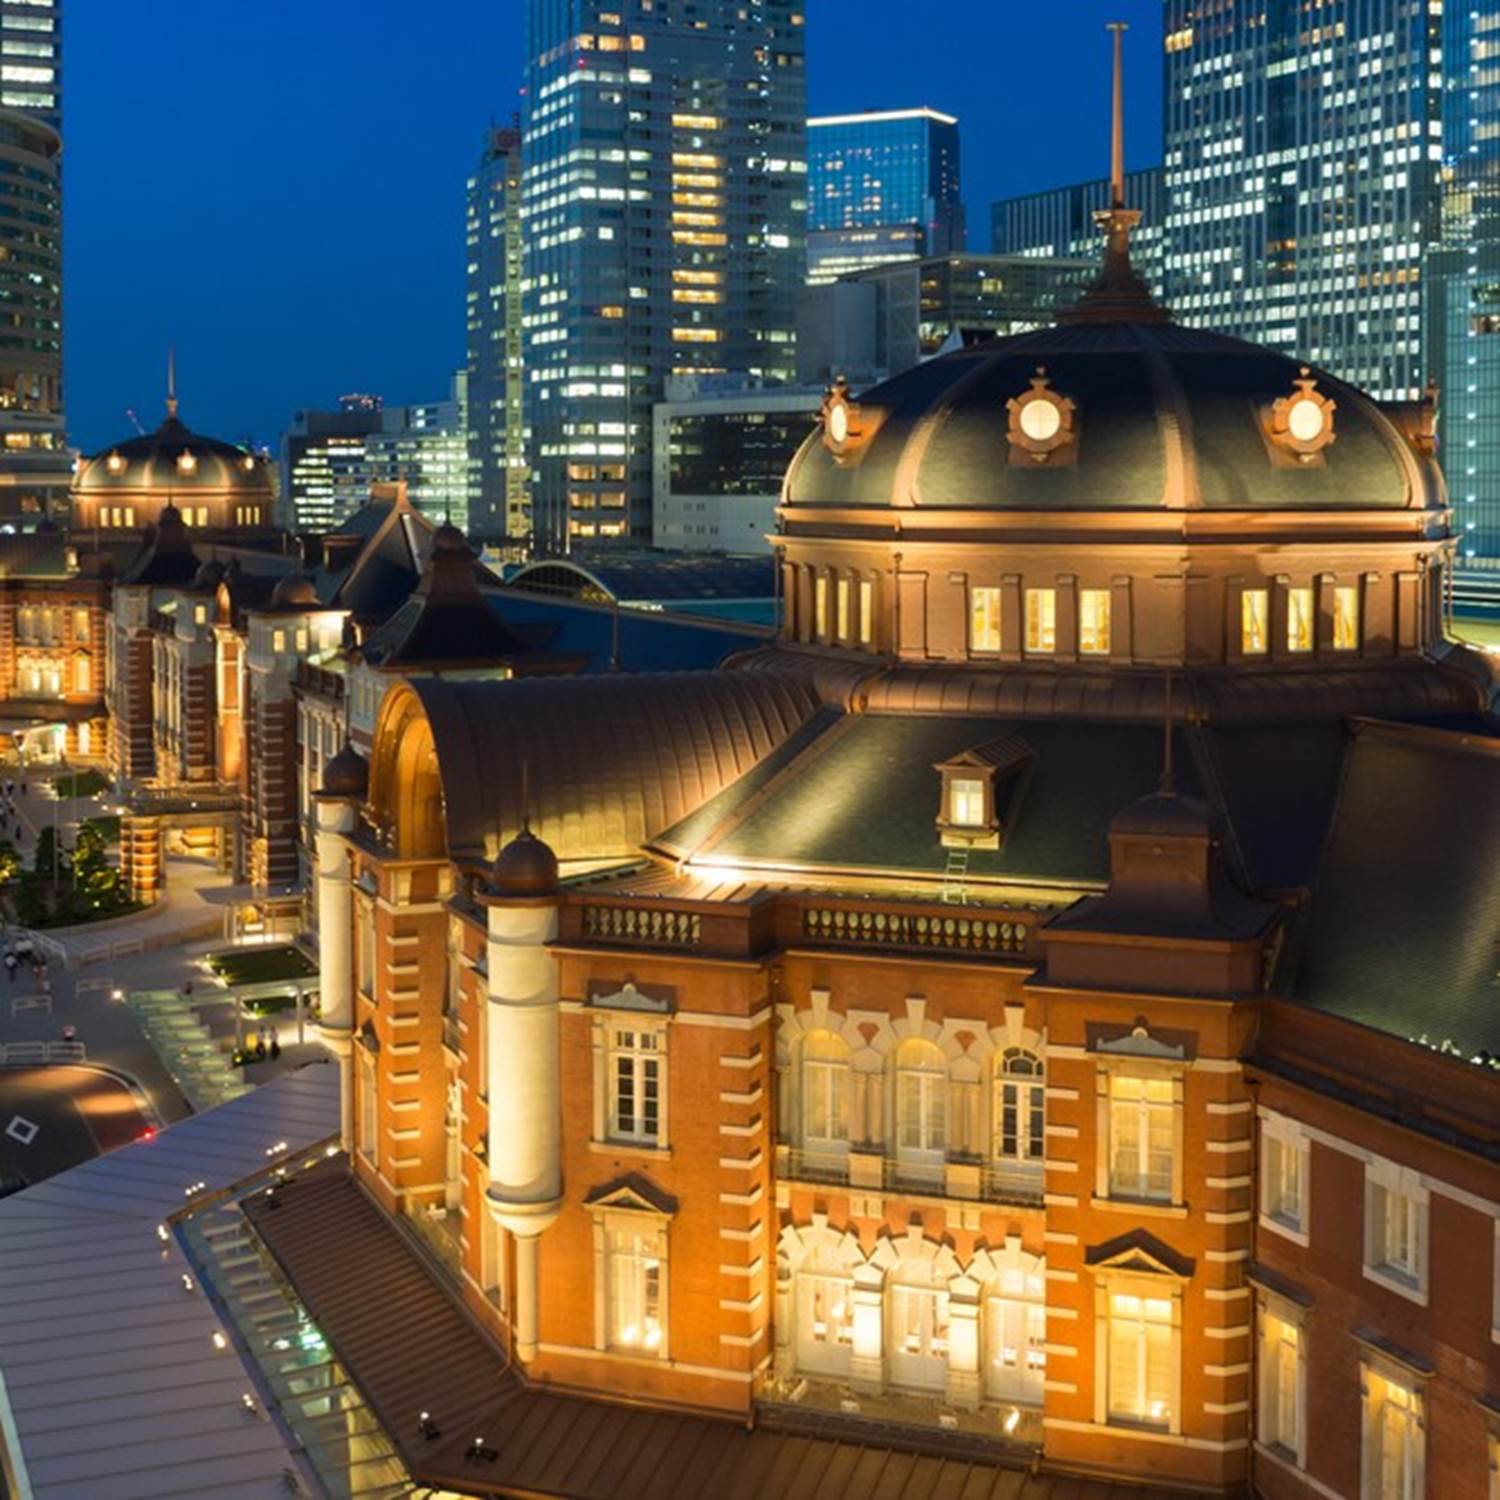 The Marunouchi District, which is located on the west side of Tokyo Station, has many fashionable shops and restaurants = Shutterstock 2